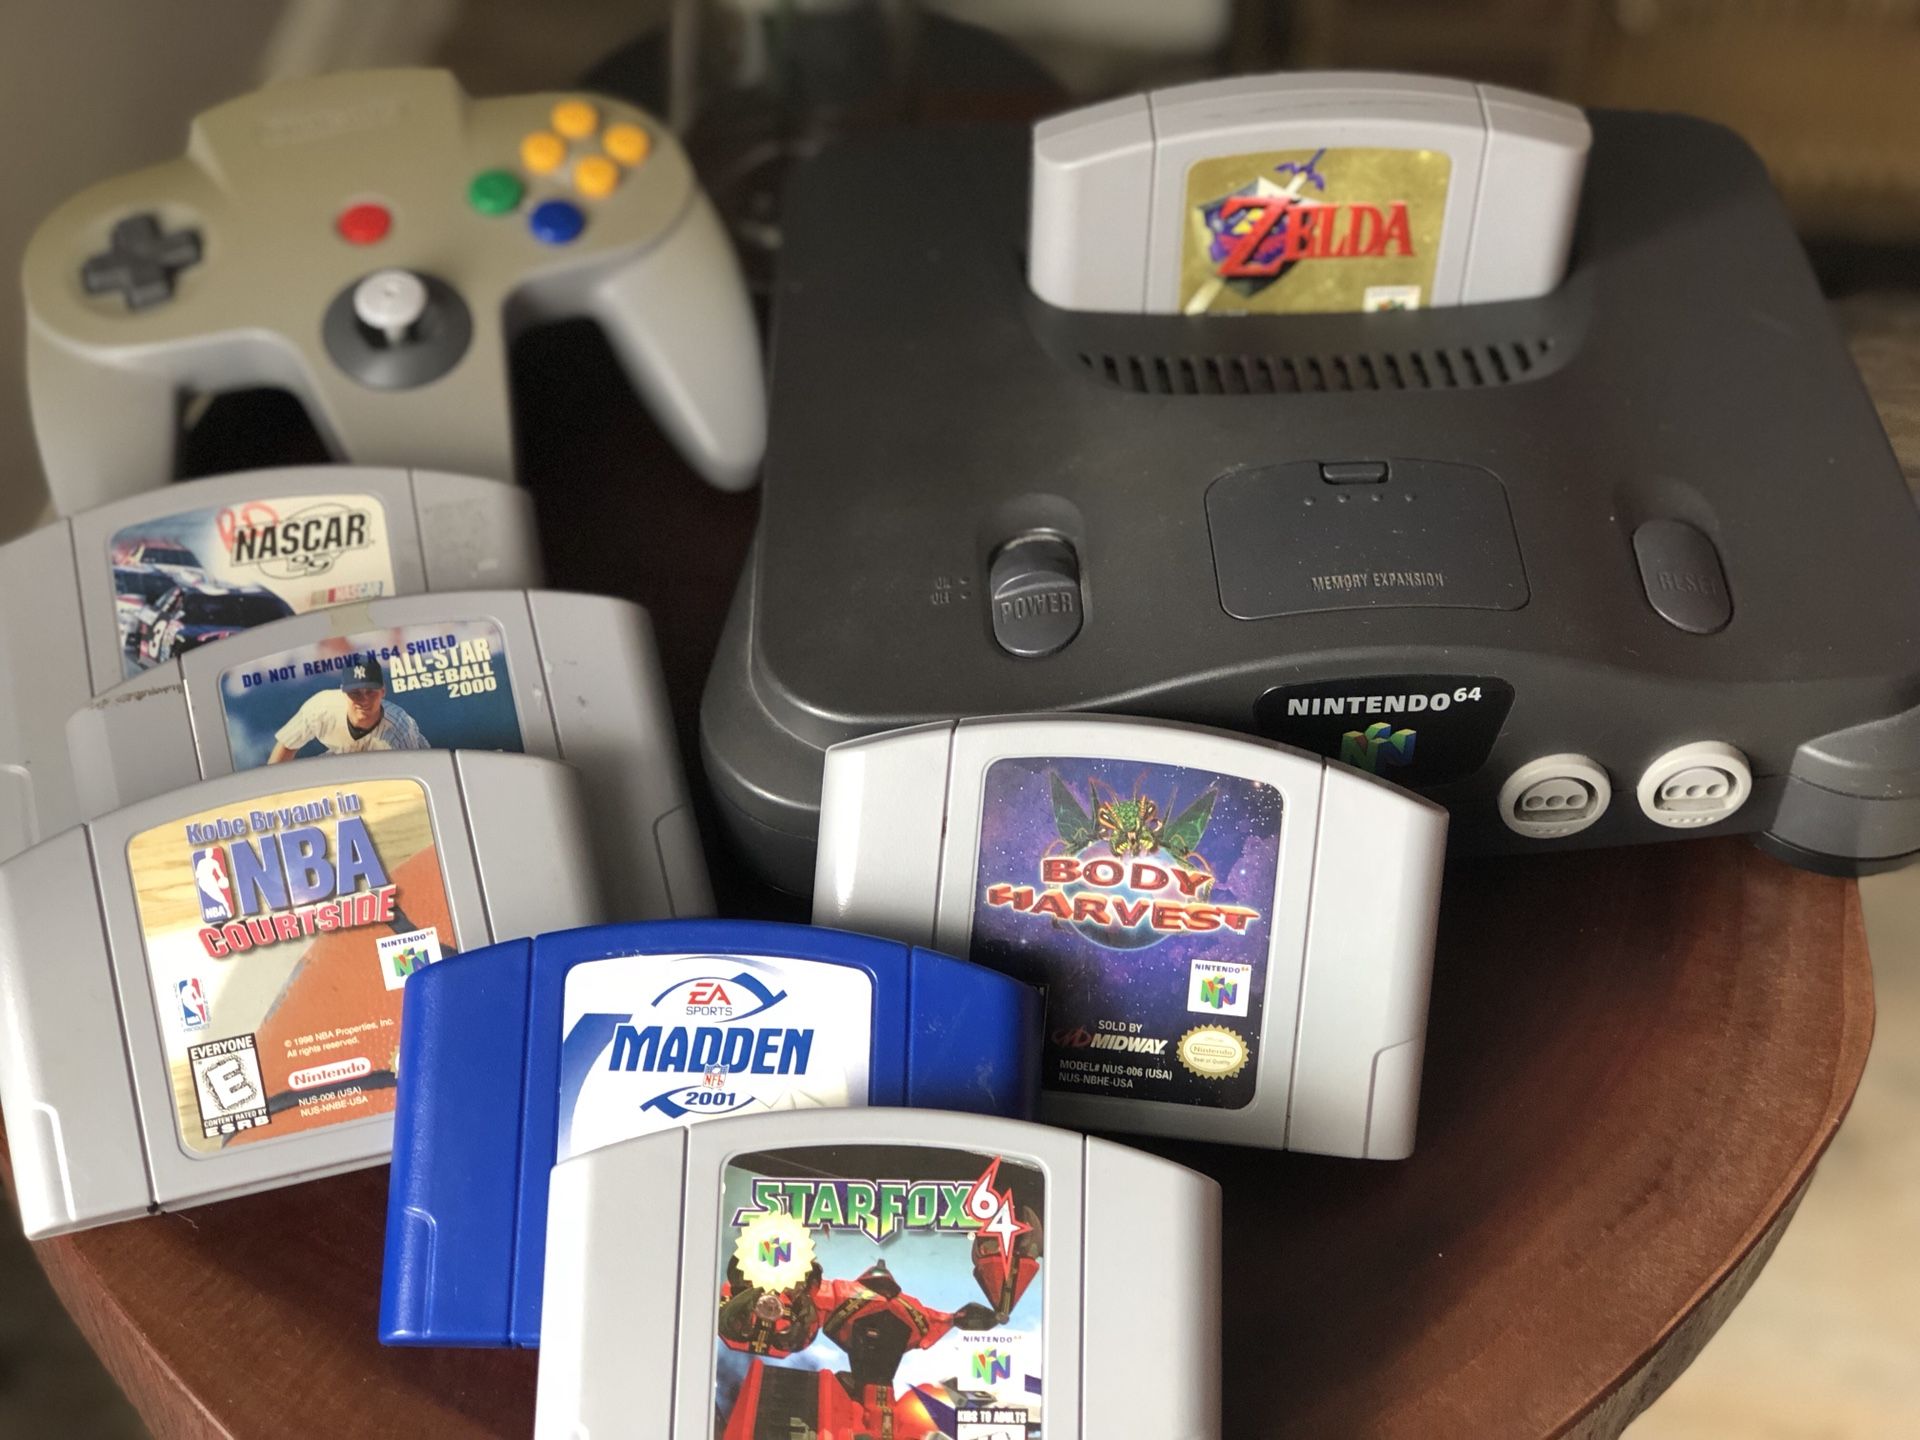 Nintendo 64 N64 with 7 games including my Zelda and Starfox. Comes with all cables and 1 controller